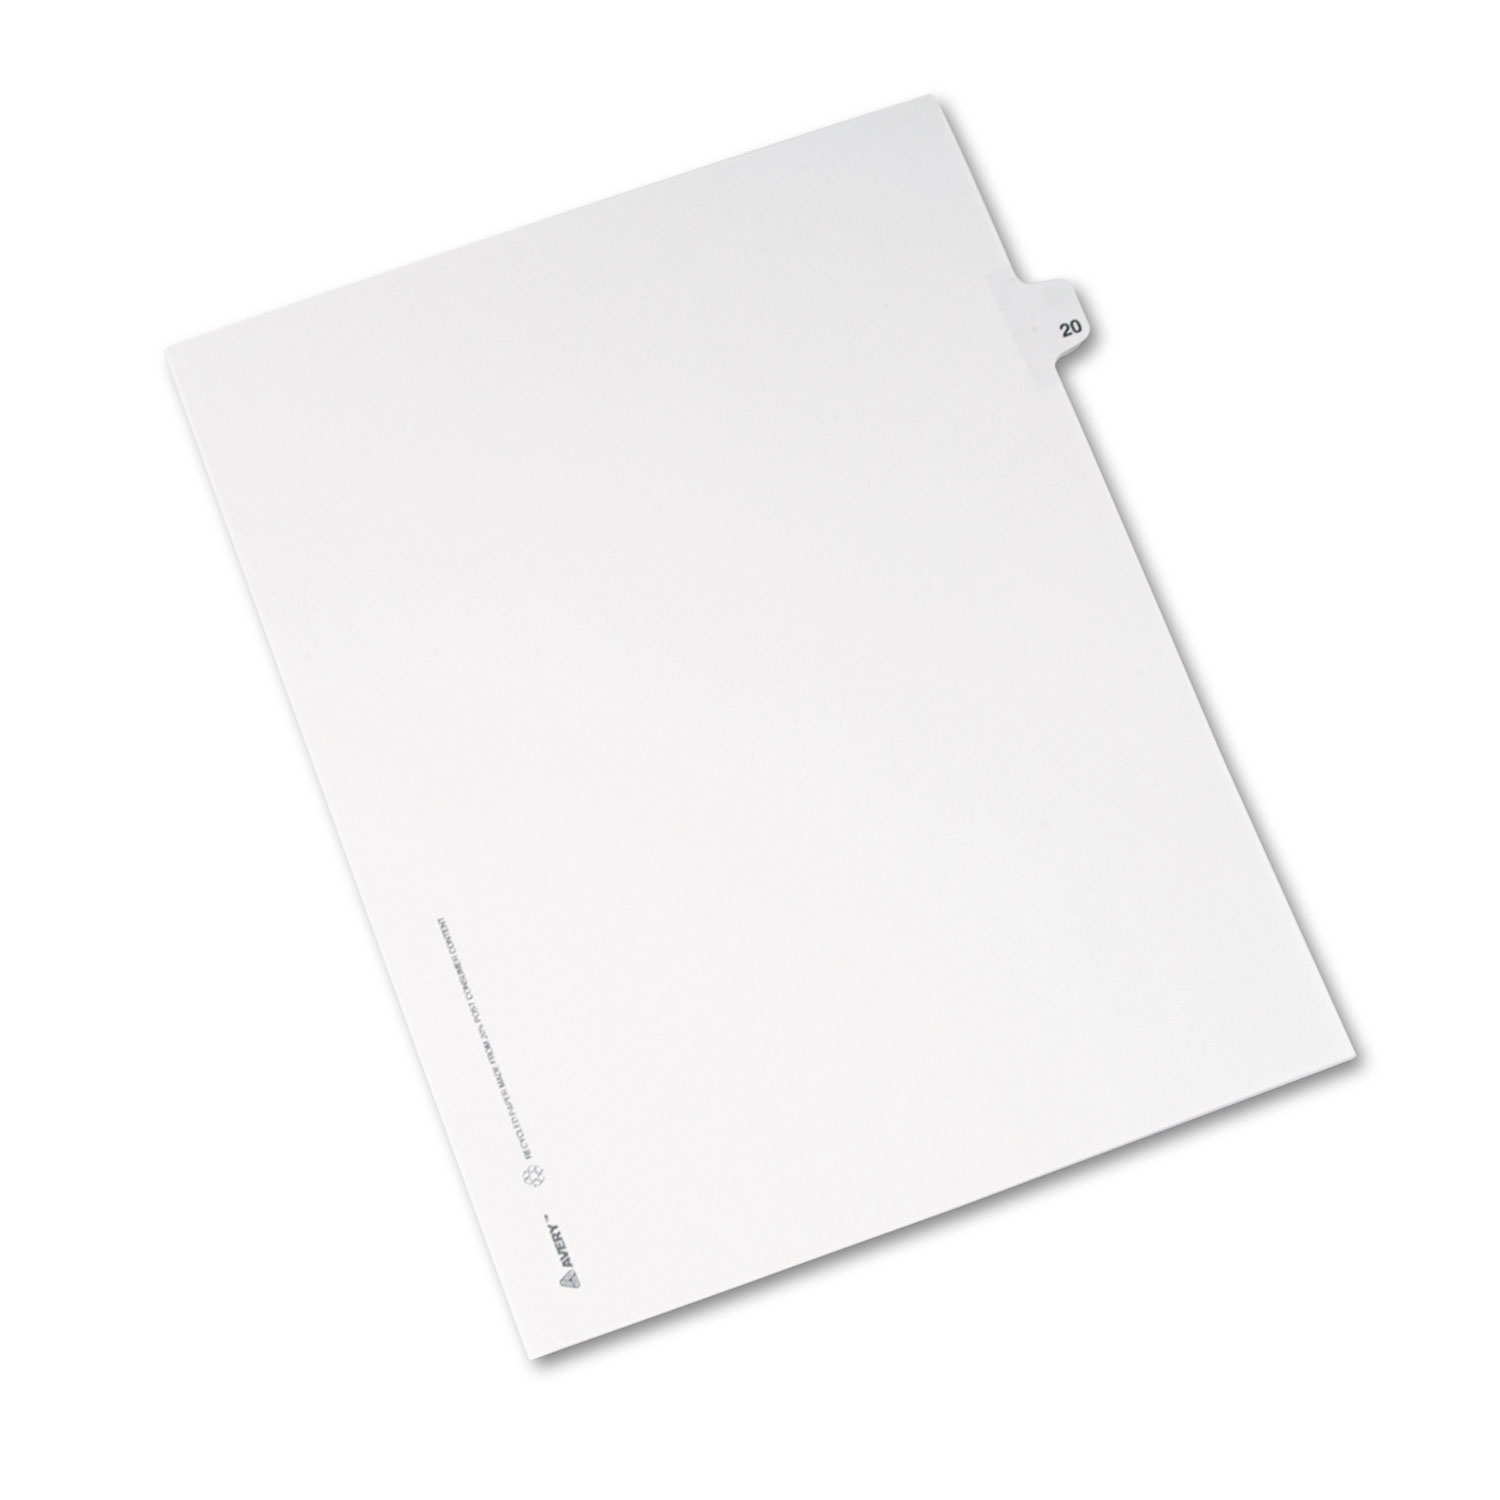 Avery-Style Legal Exhibit Side Tab Divider, Title: 20, Letter, White, 25/Pack